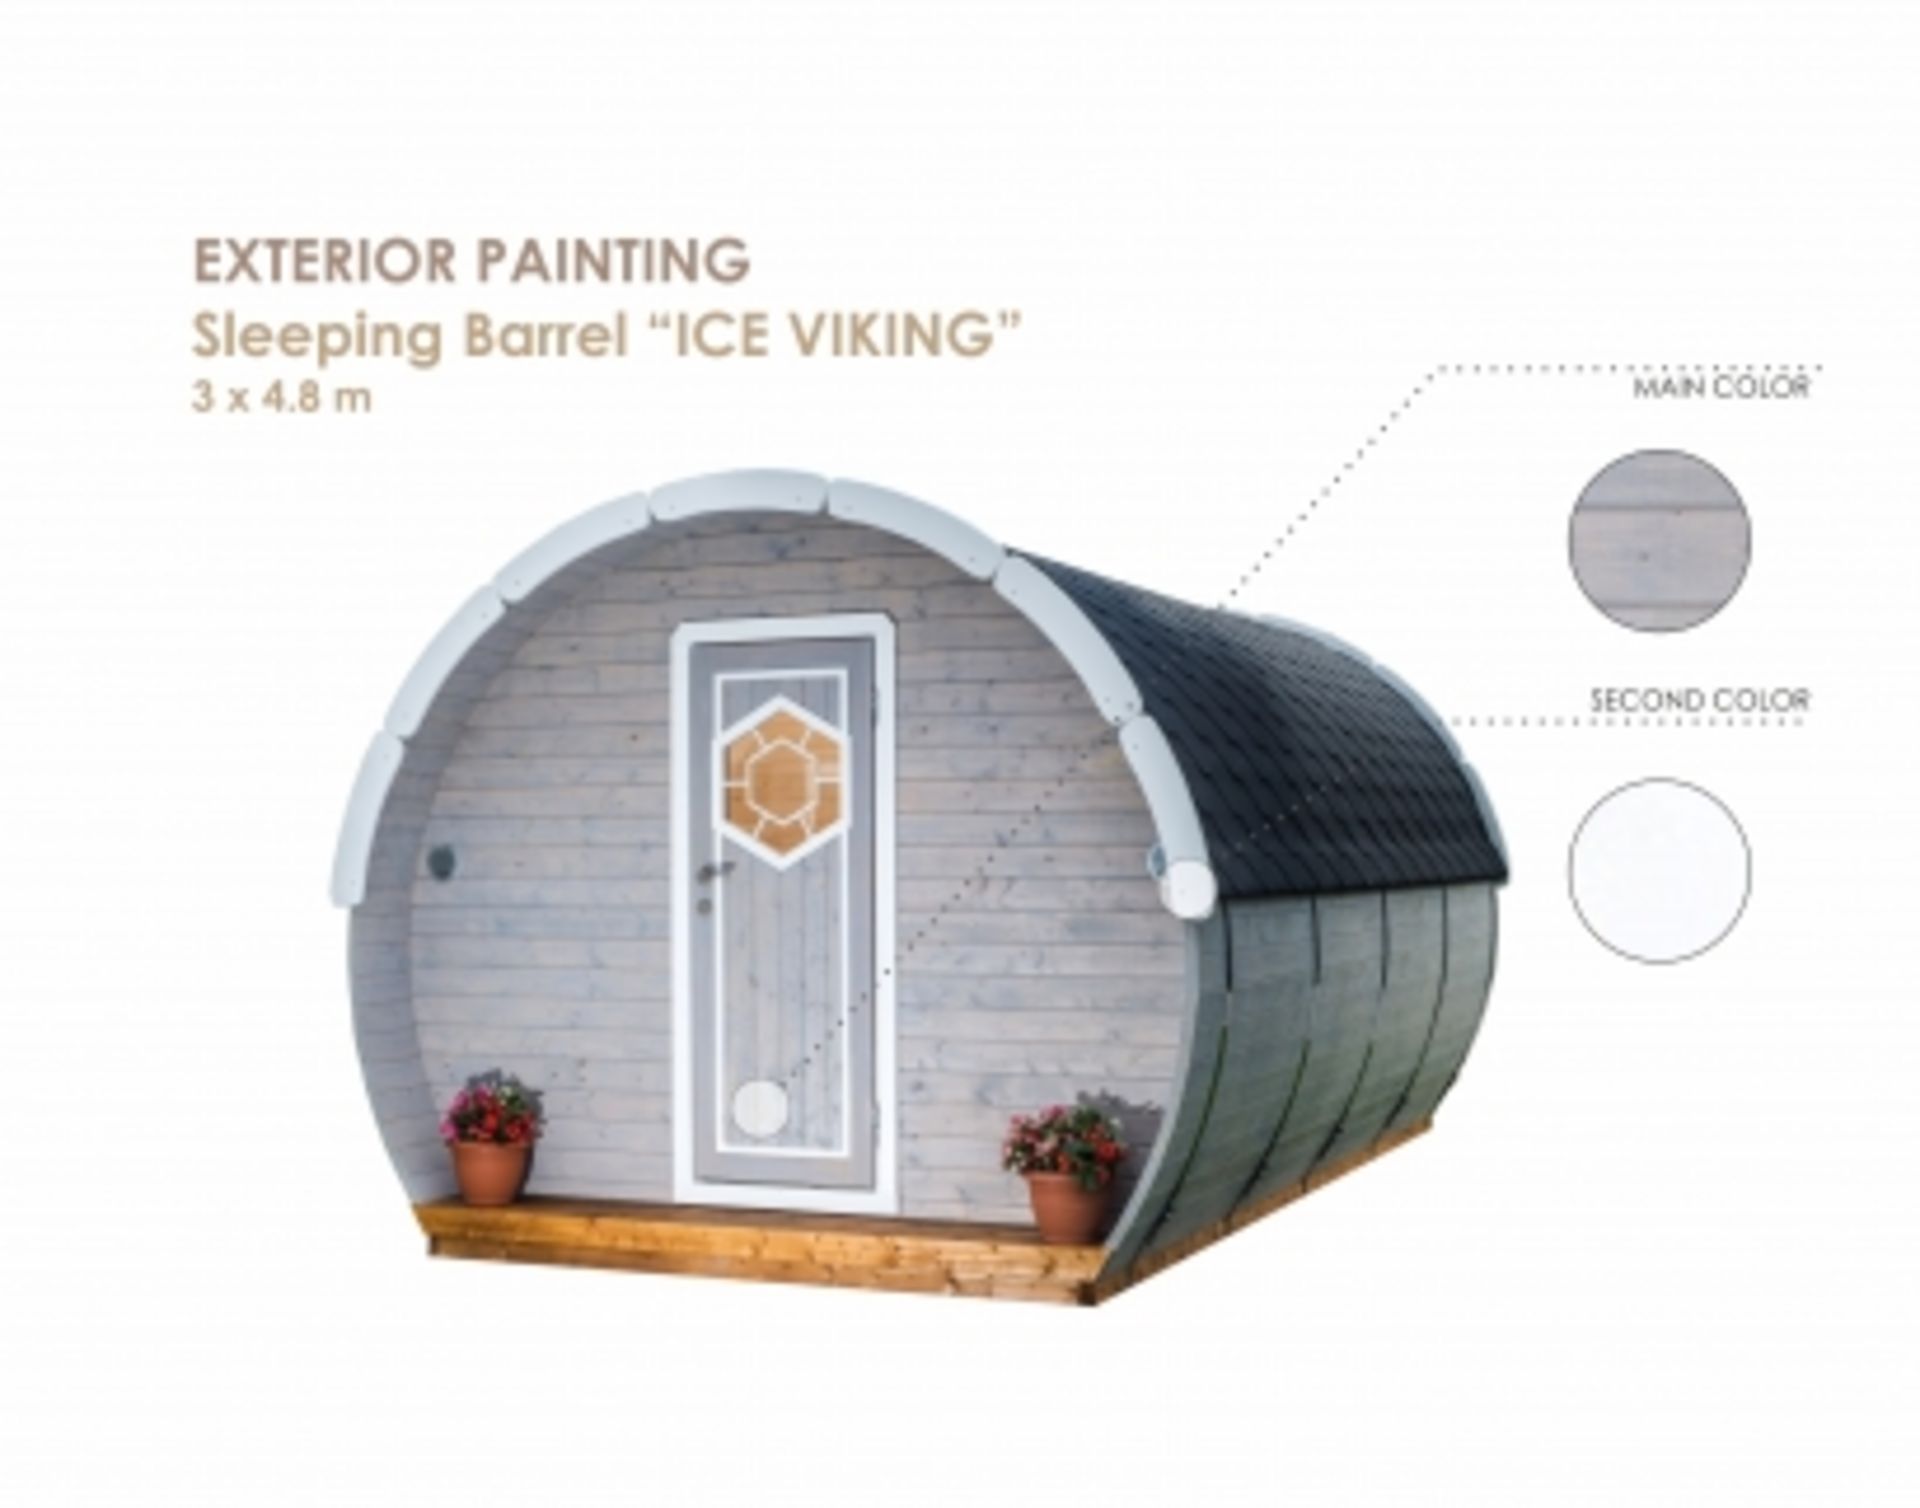 + VAT Brand New 3 x 4.8m Ice Viking Sleeping Barrel - Barrel Made From Spruce - Roof Covered With